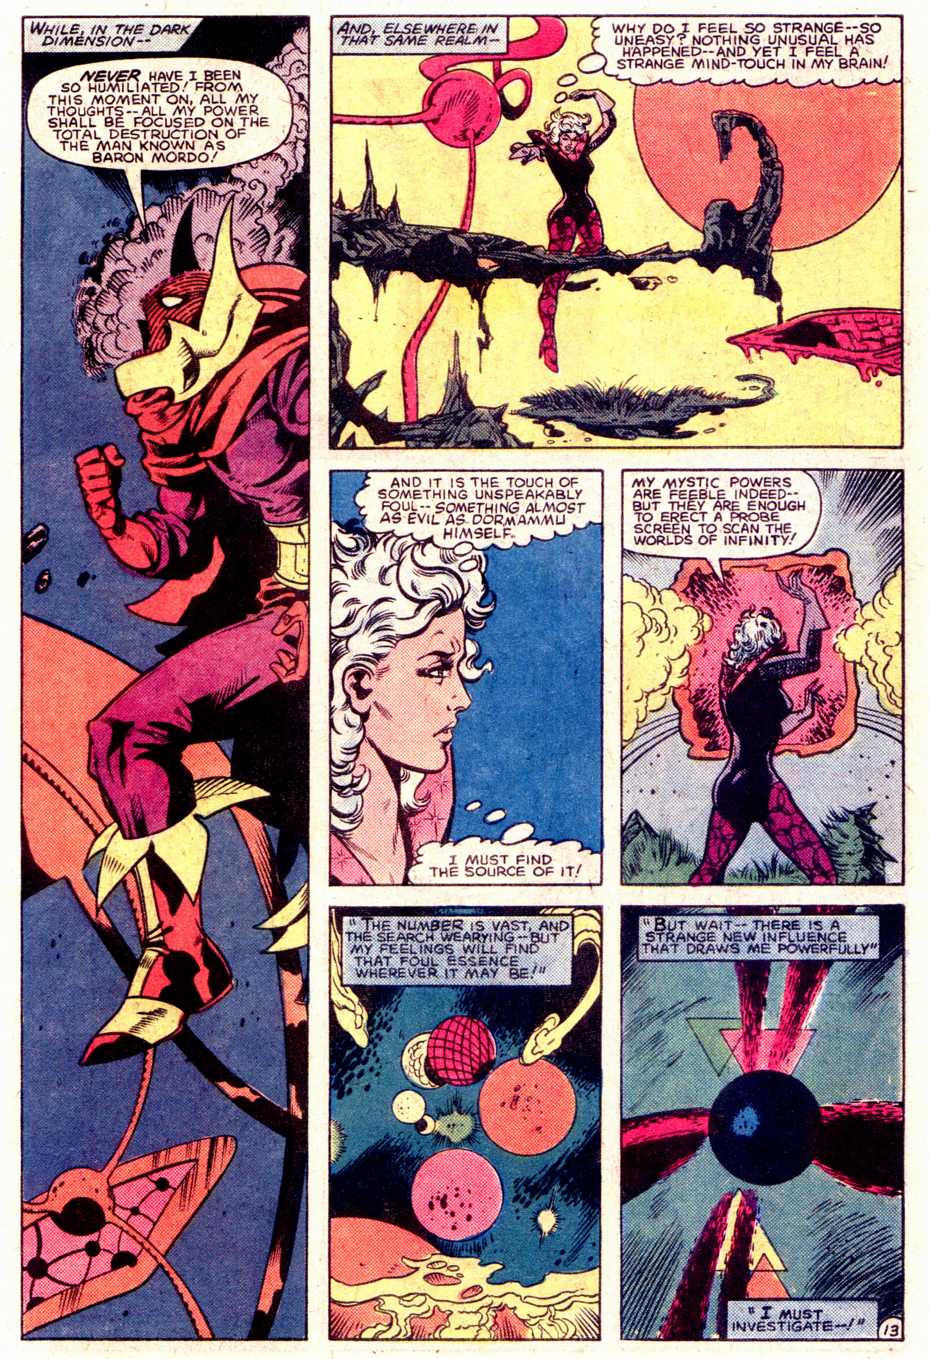 What If? (1977) issue 40 - Dr Strange had not become master of The mystic arts - Page 14